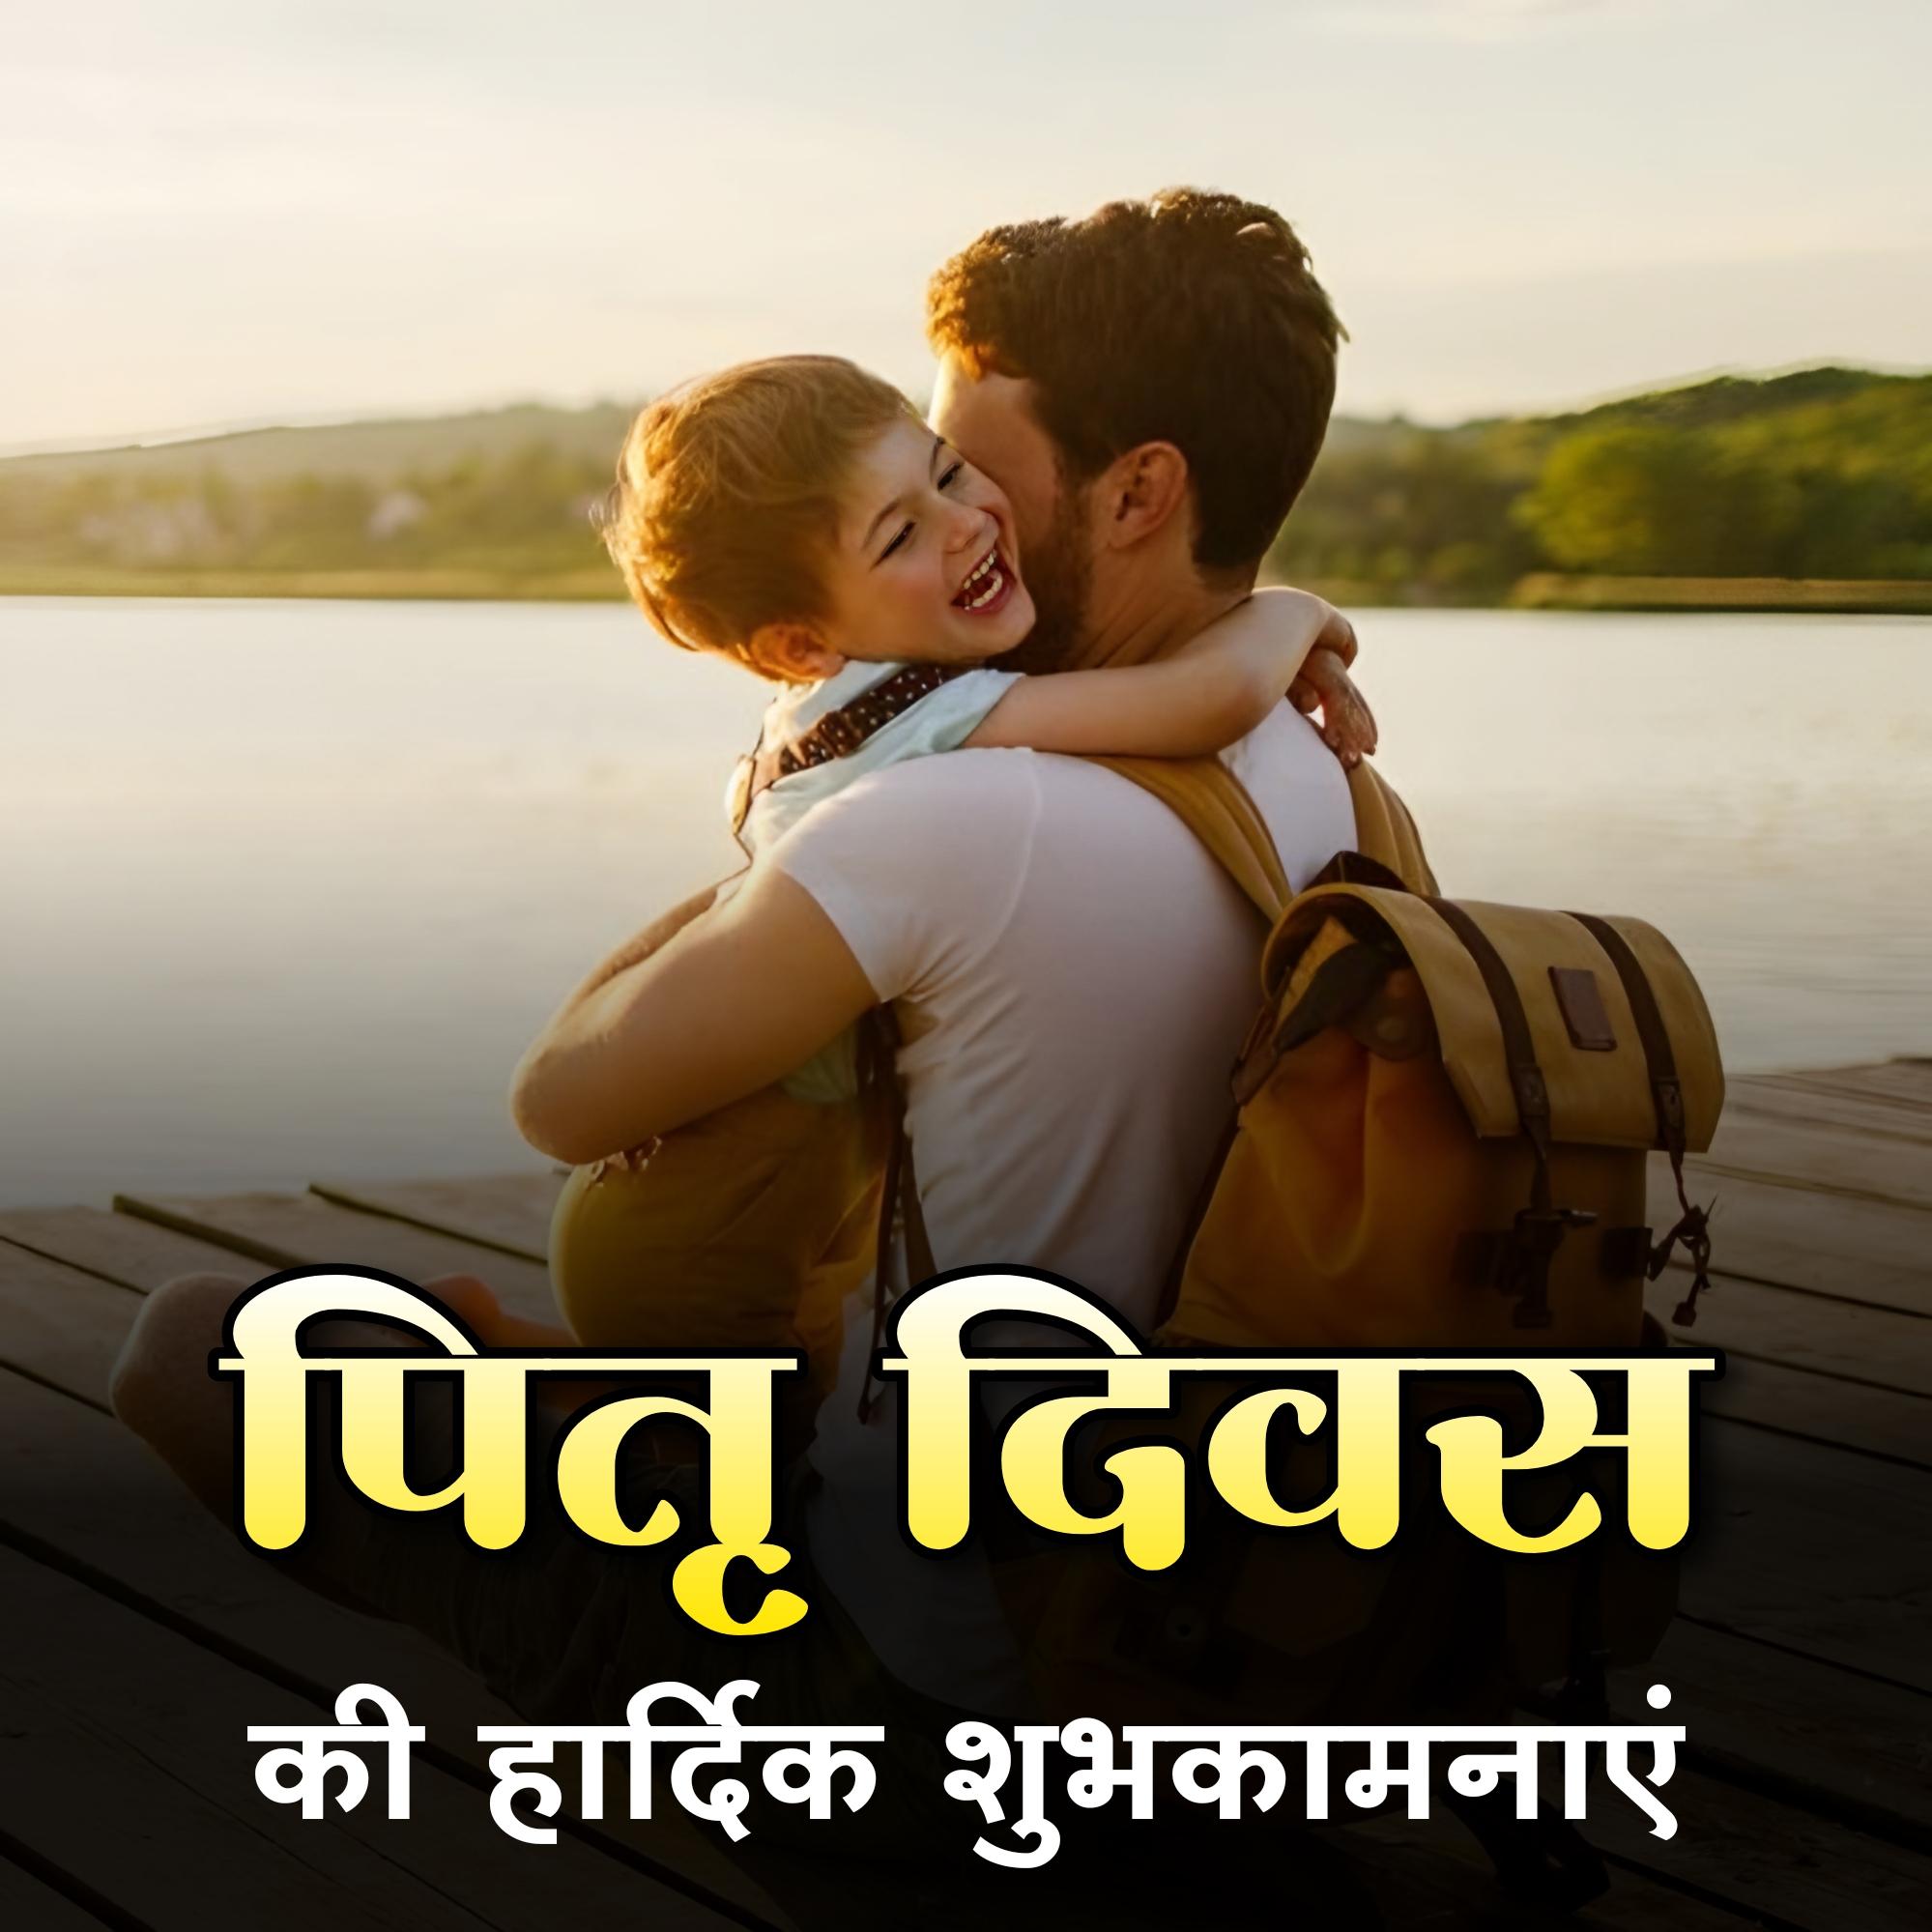 Happy Fathers Day Images in Hindi Download